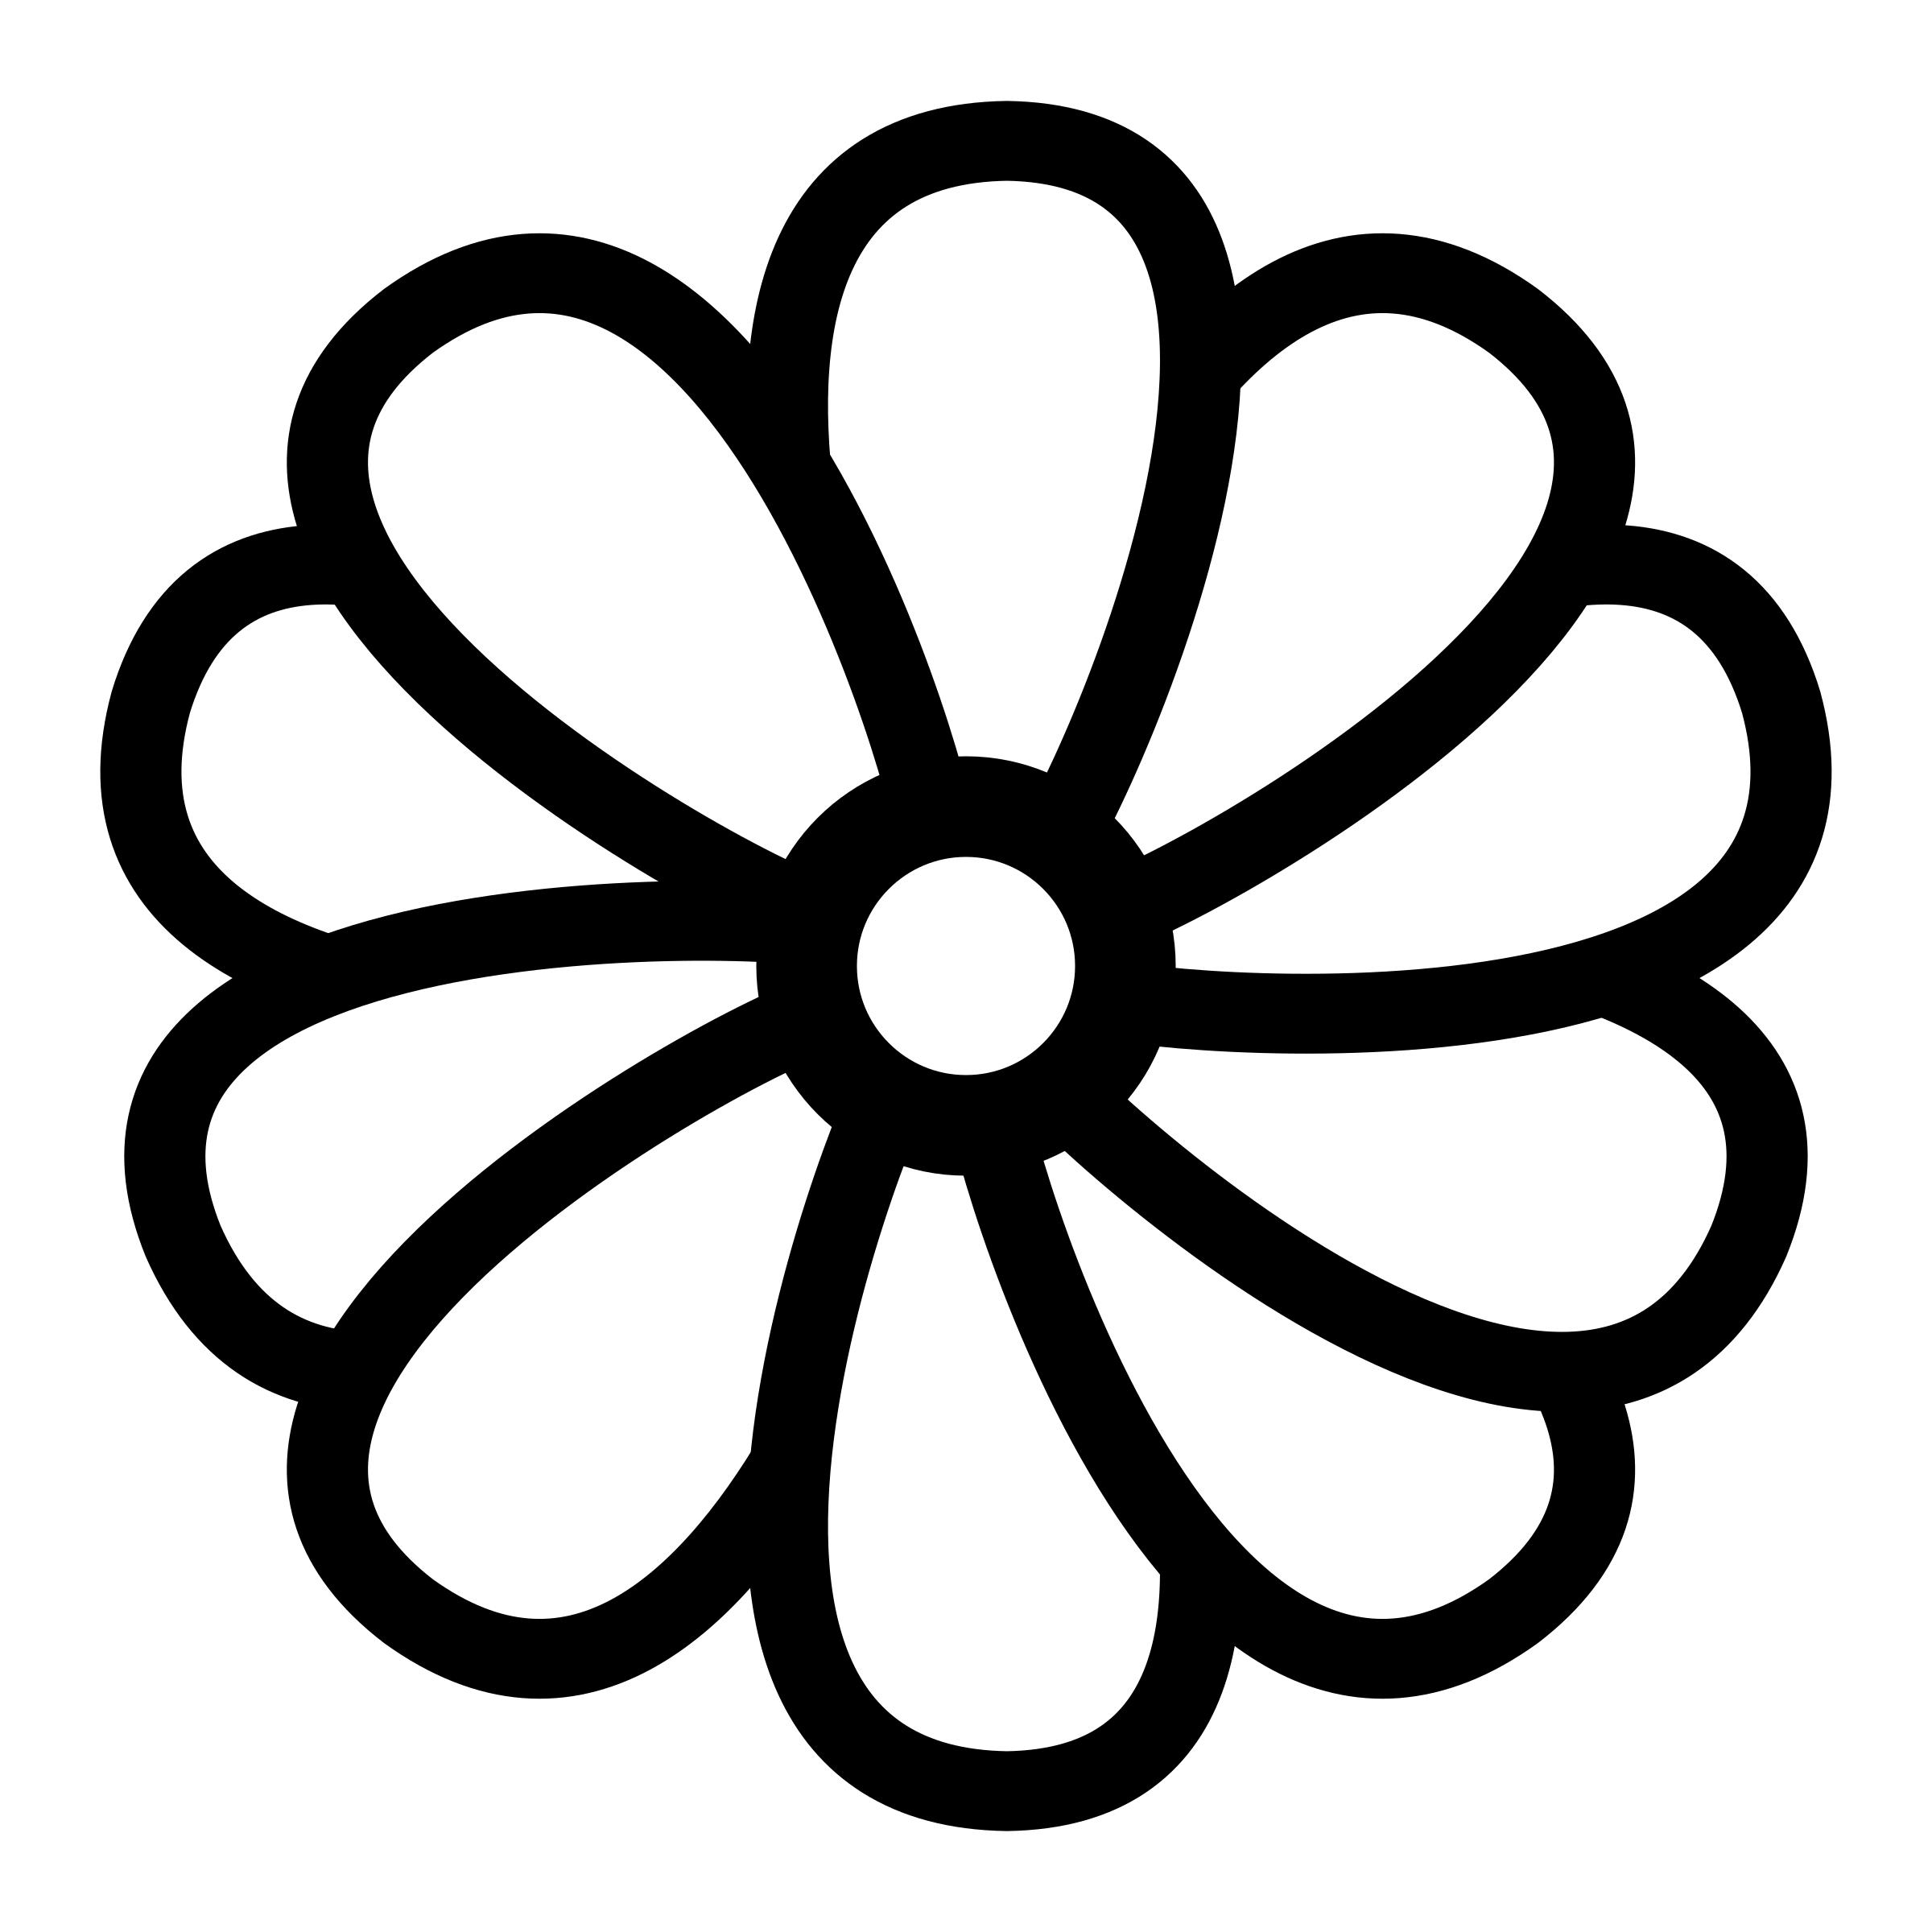 mono icq online png